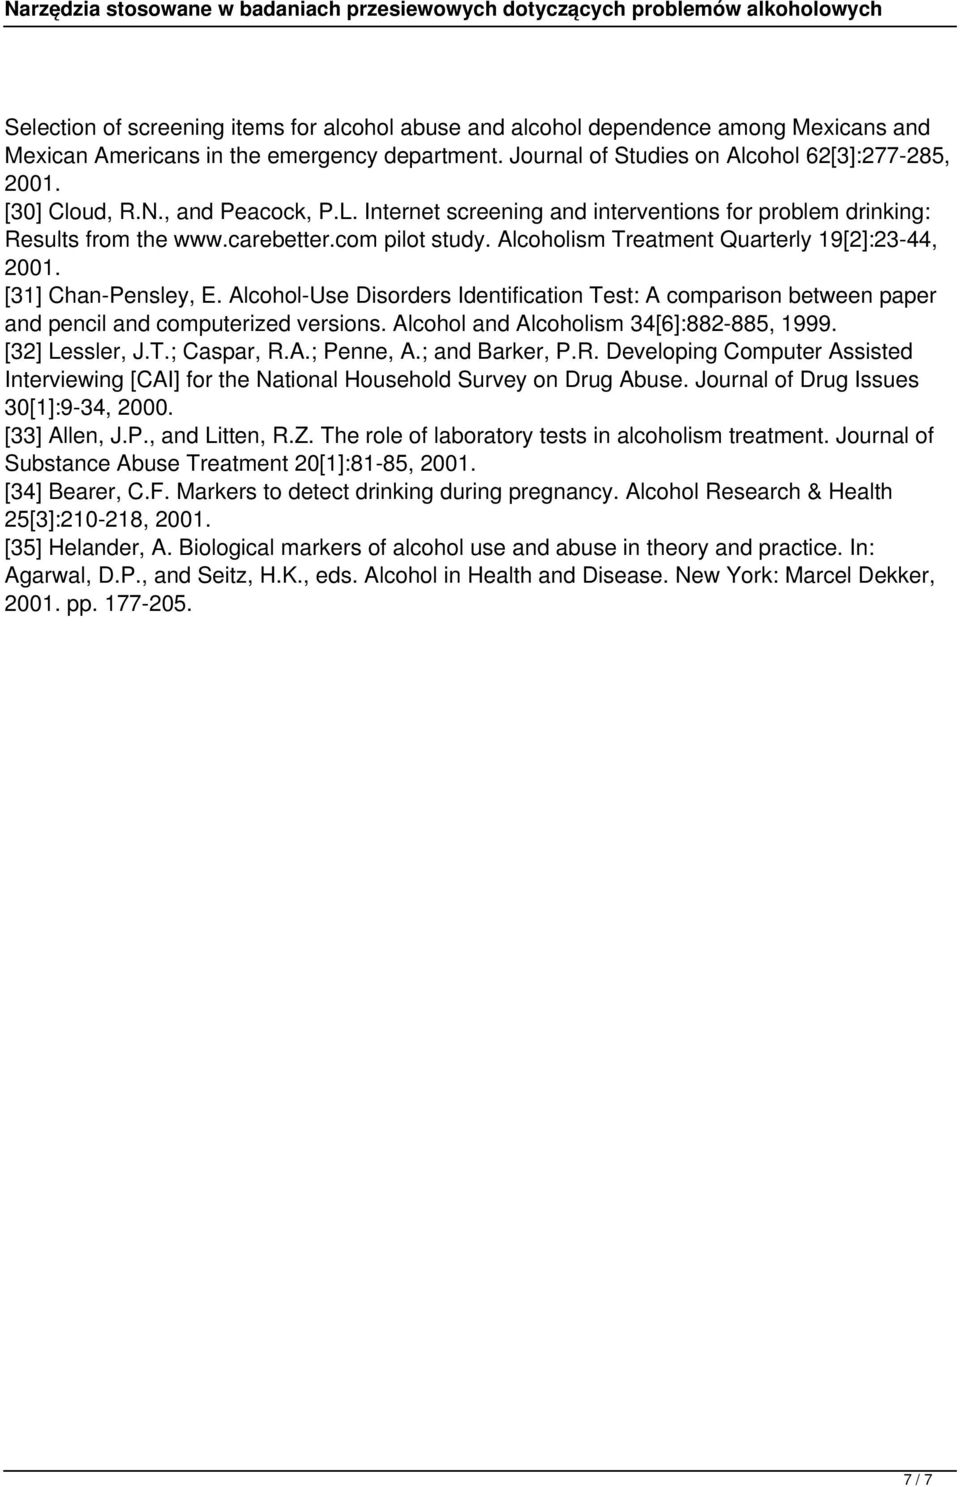 [31] Chan-Pensley, E. Alcohol-Use Disorders Identification Test: A comparison between paper and pencil and computerized versions. Alcohol and Alcoholism 34[6]:882-885, 1999. [32] Lessler, J.T.; Caspar, R.